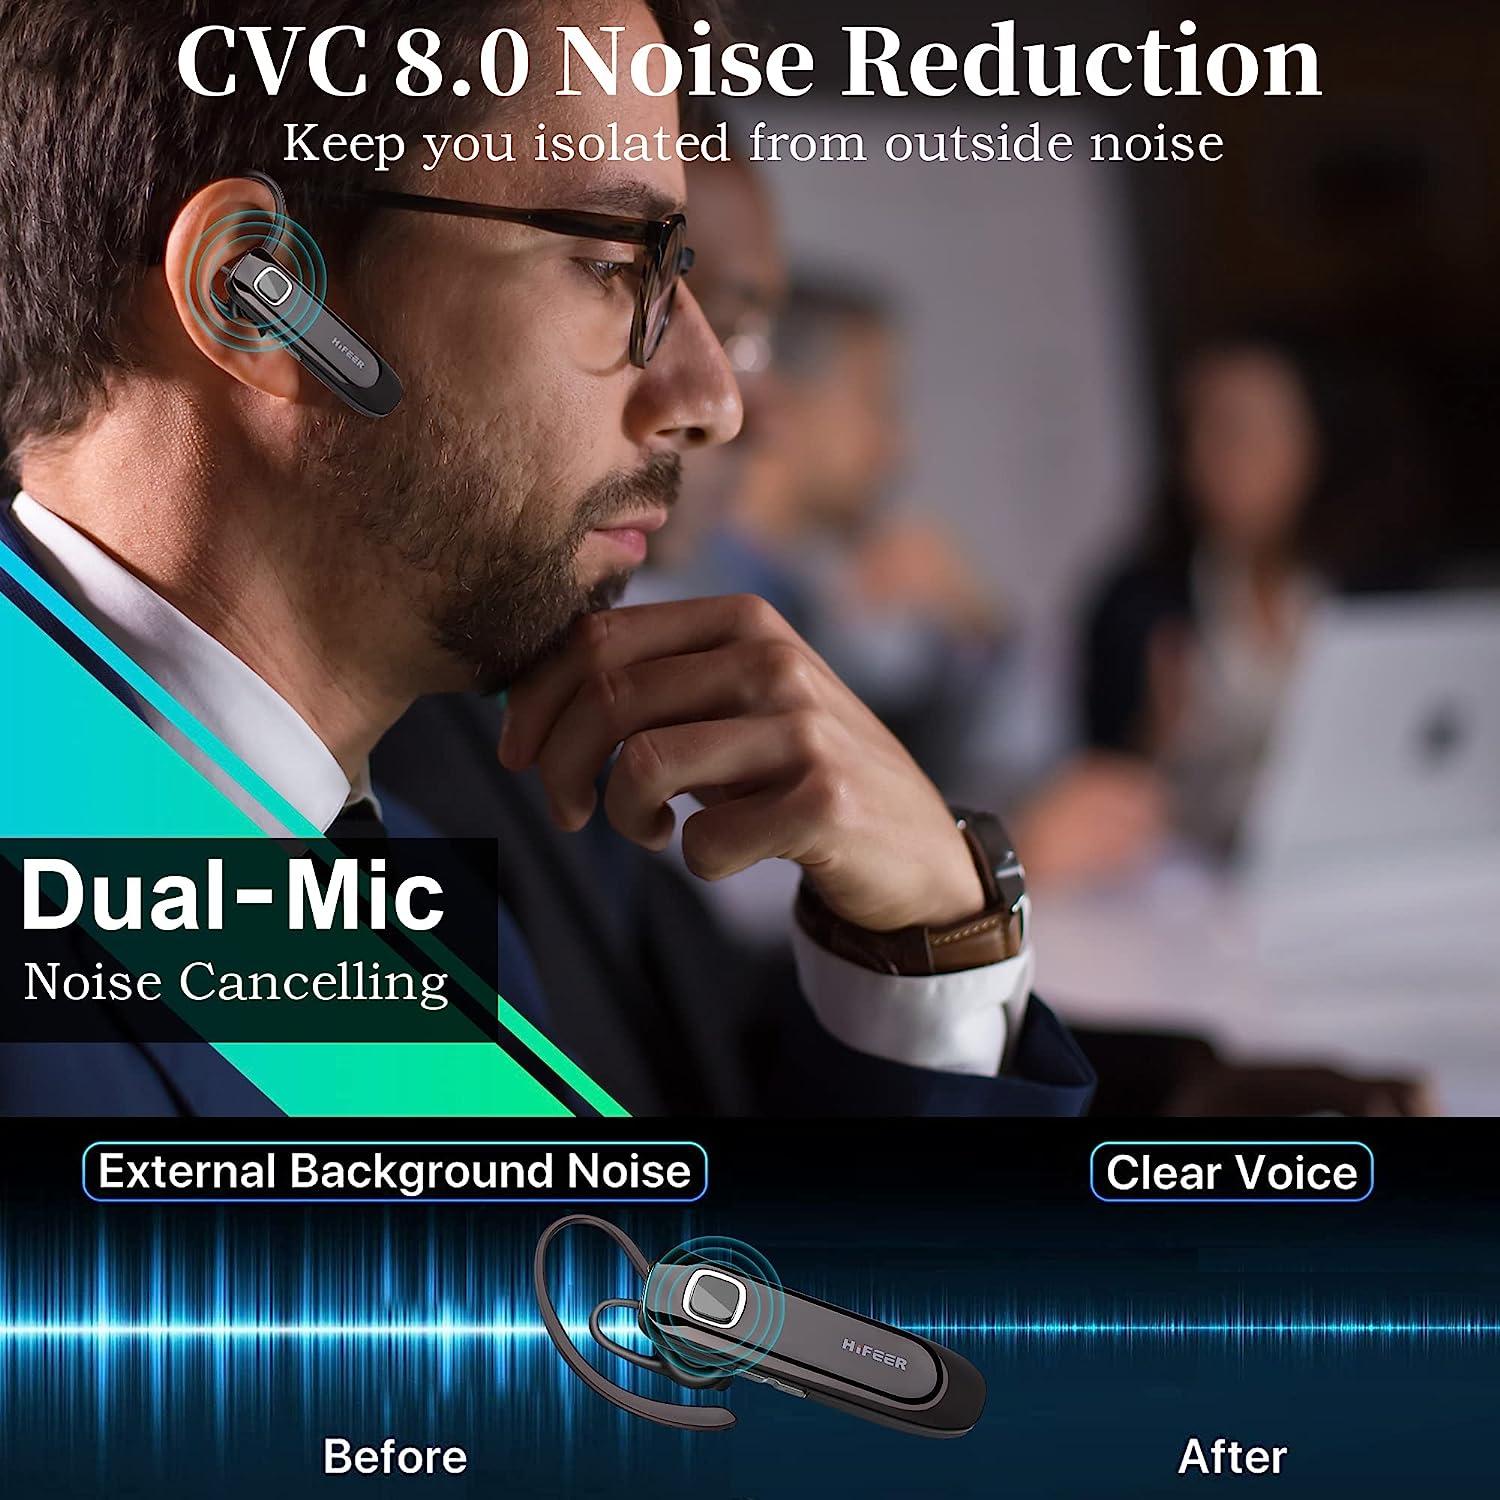 New Bee Bluetooth Earpiece V5.0 User Manual - How to Use and Troubleshoot 